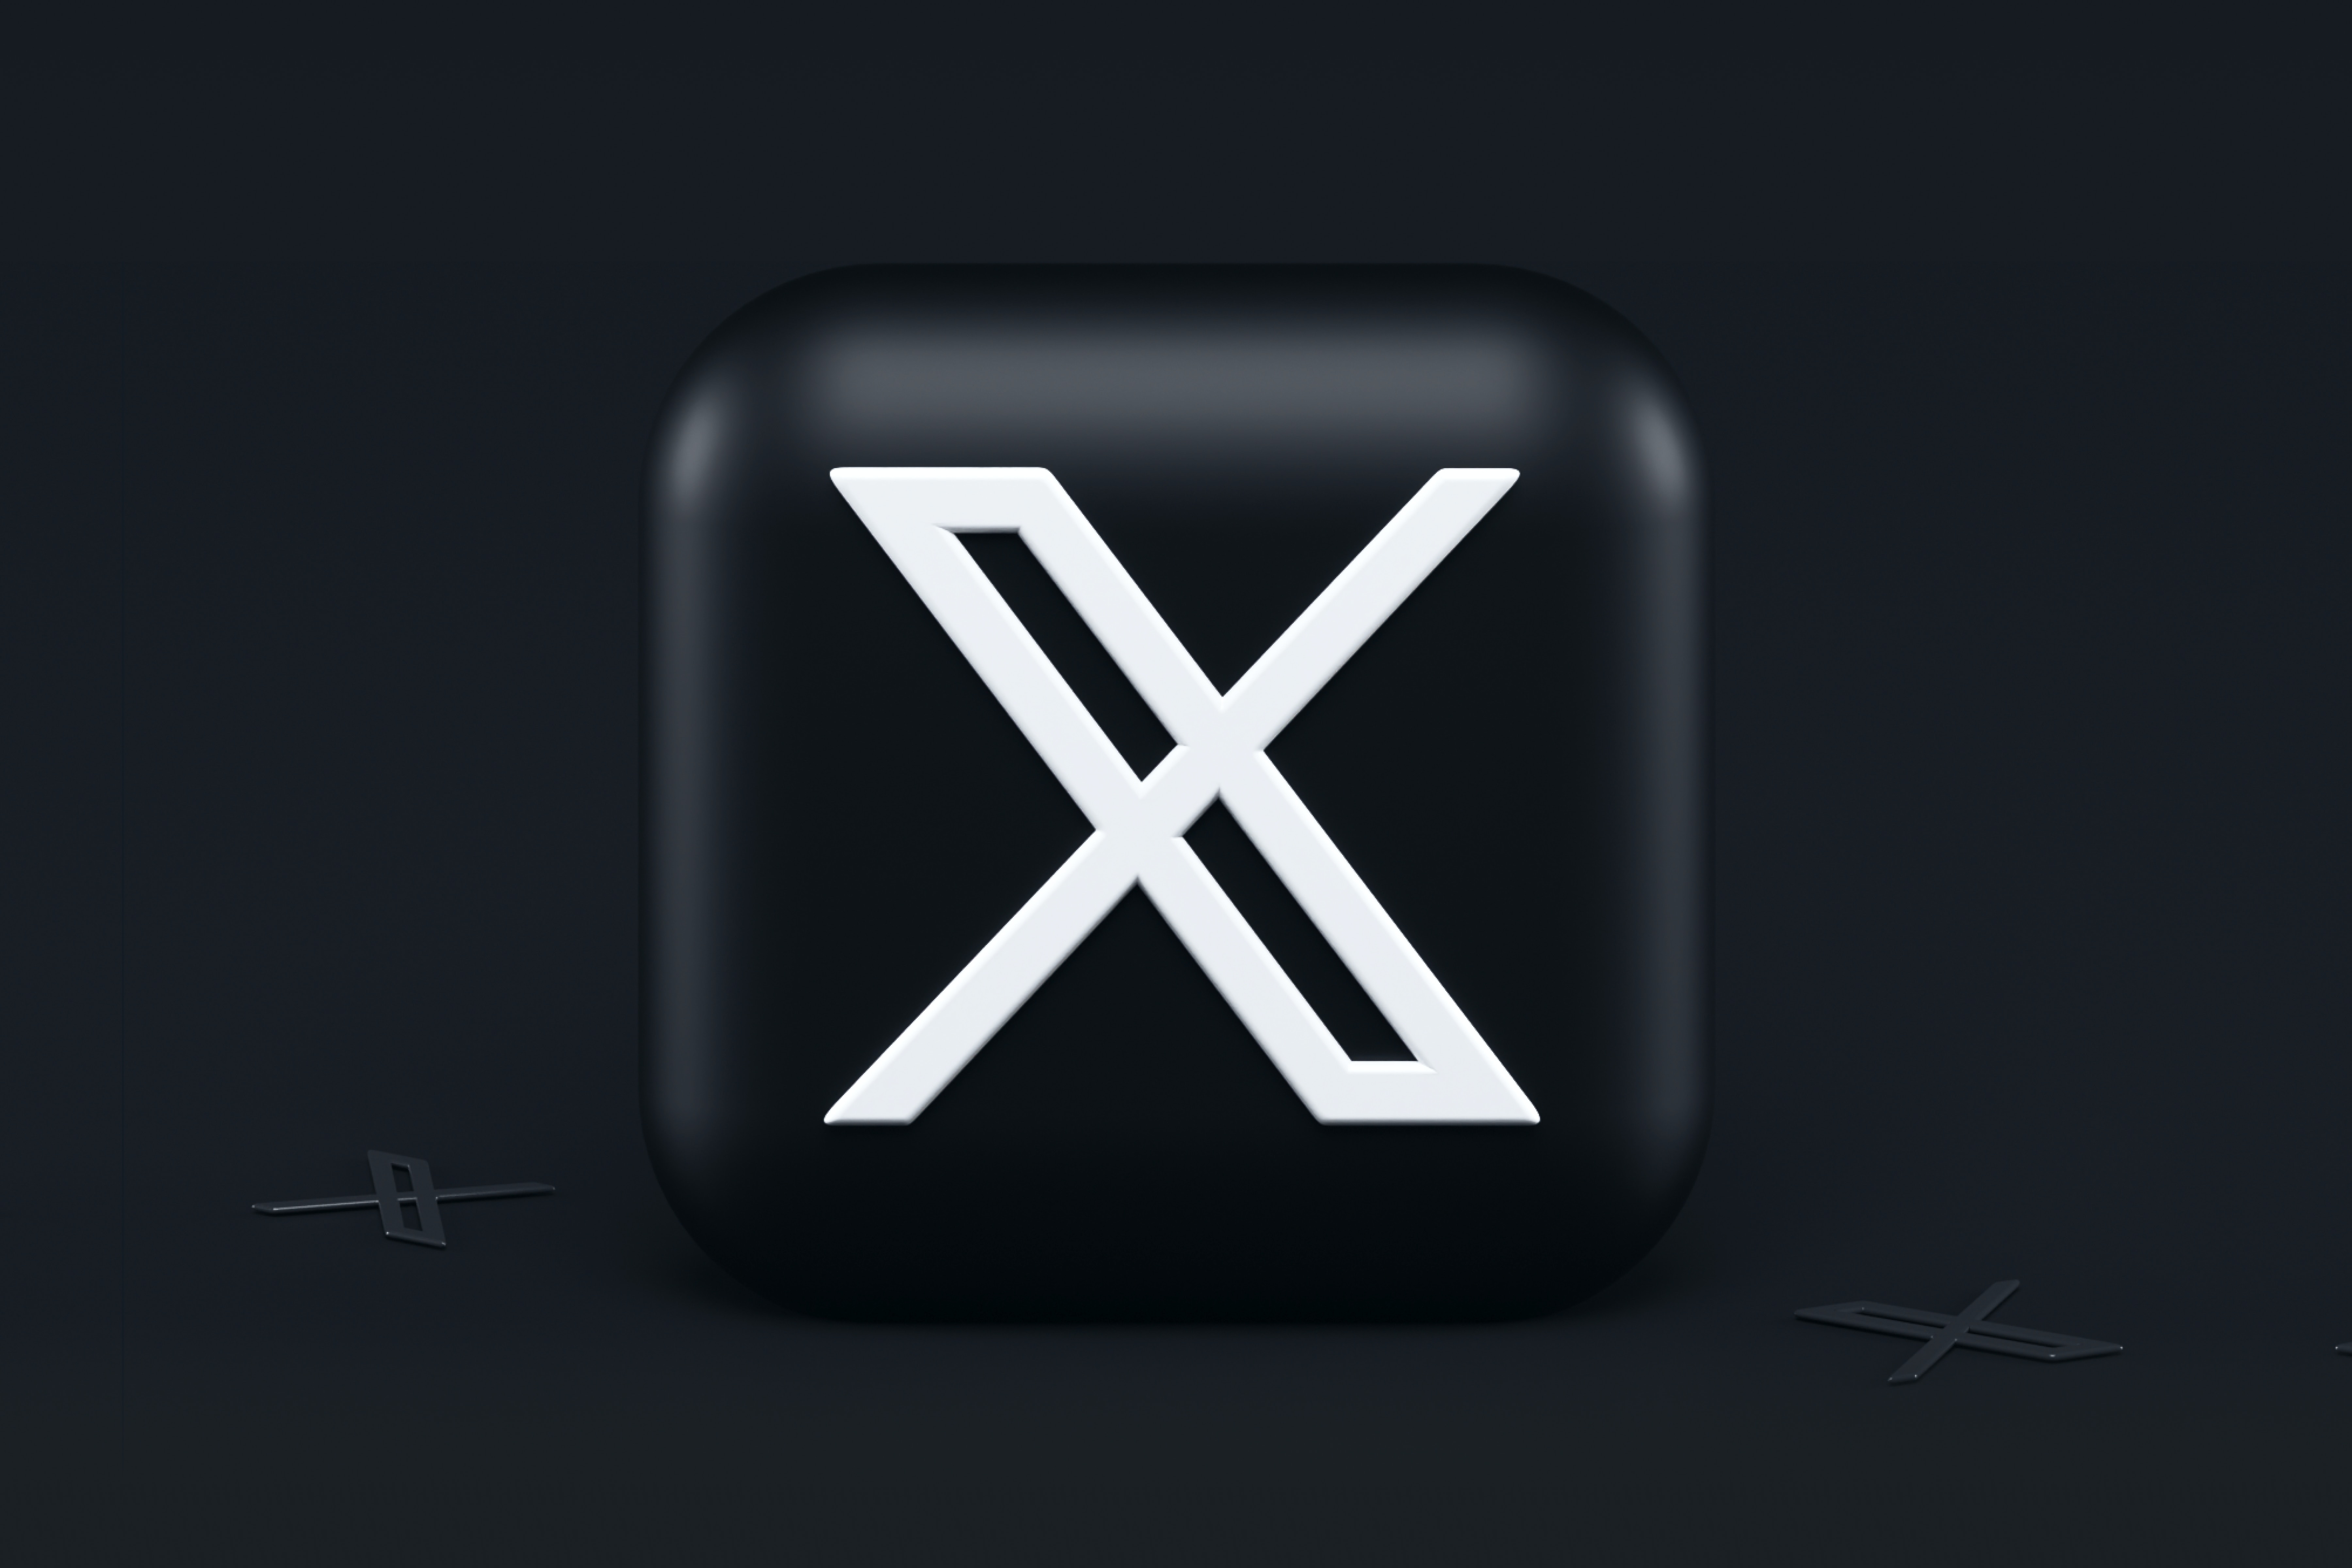 X Logo - Black background with X in white.